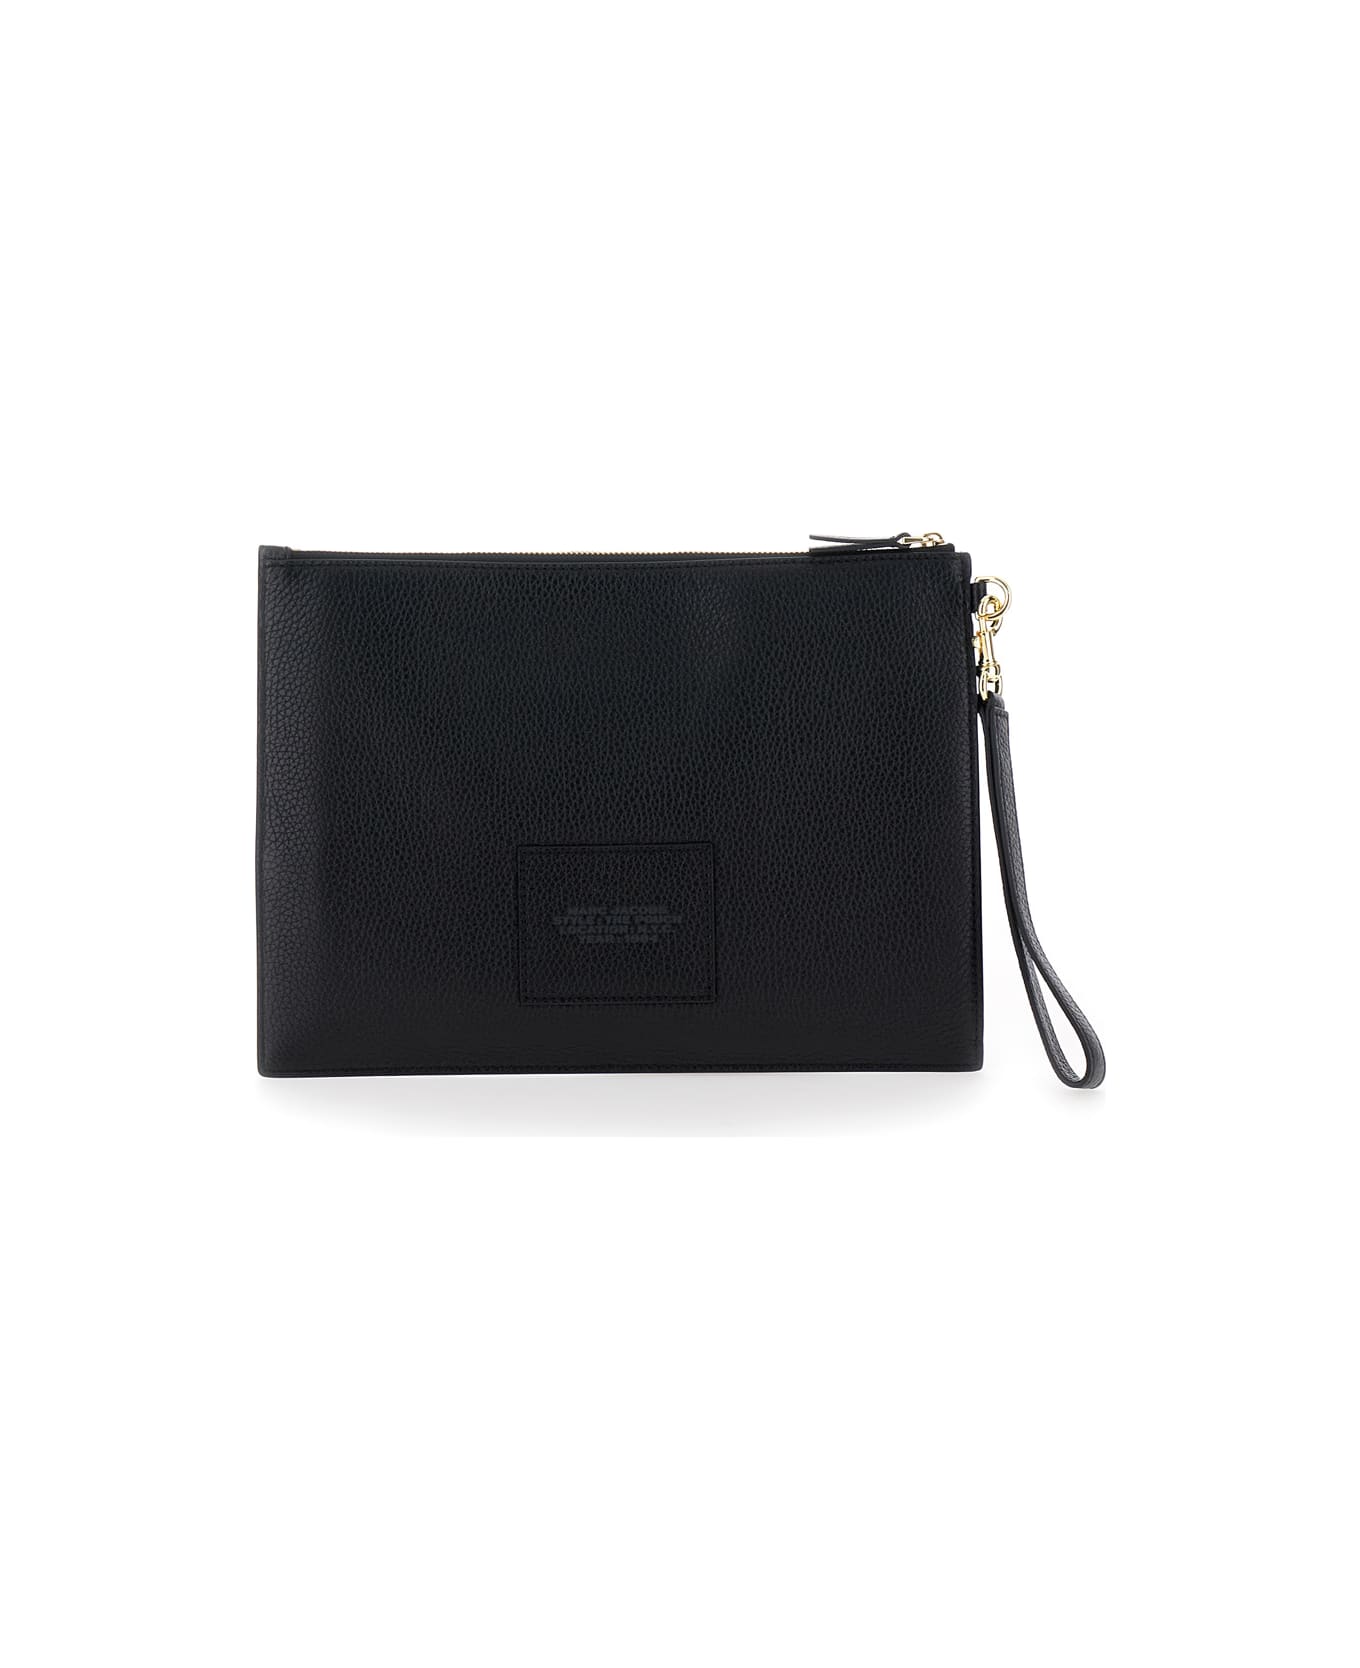 Marc Jacobs The Large Pouch - Black クラッチバッグ